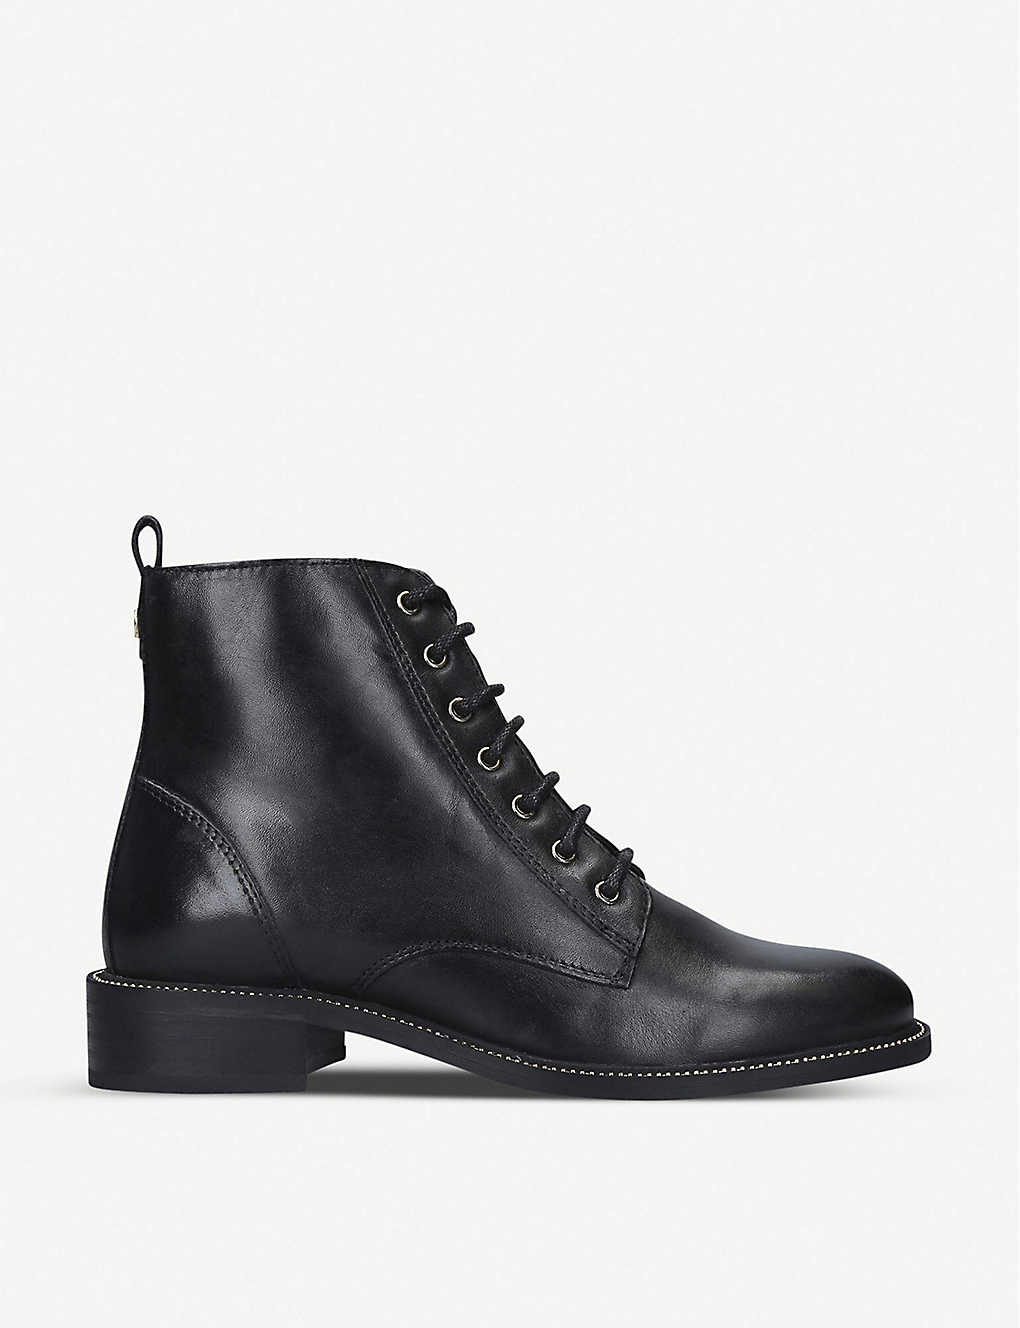 Carvela Spike Leather Ankle Boots In Black